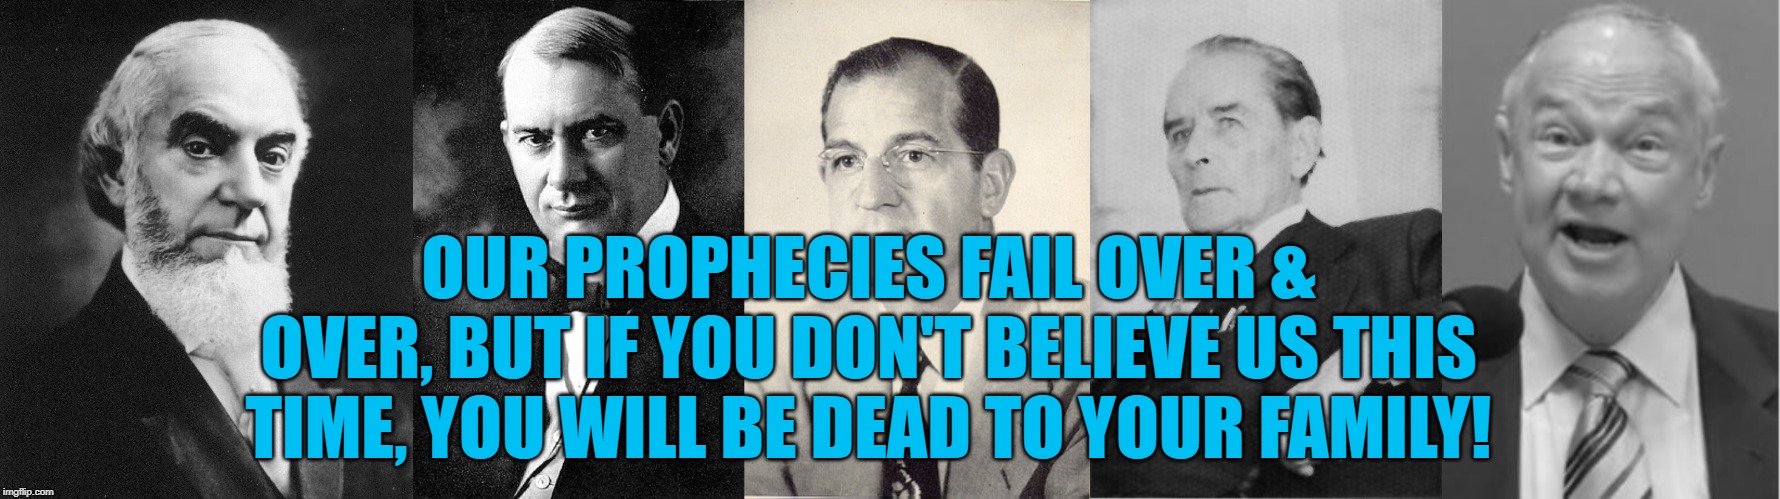 JEHOVAH'S WITNESSES PROPHECIES | OUR PROPHECIES FAIL OVER & OVER, BUT IF YOU DON'T BELIEVE US THIS TIME, YOU WILL BE DEAD TO YOUR FAMILY! | image tagged in jehovah's witness,cult,anti religion,jesus christ | made w/ Imgflip meme maker